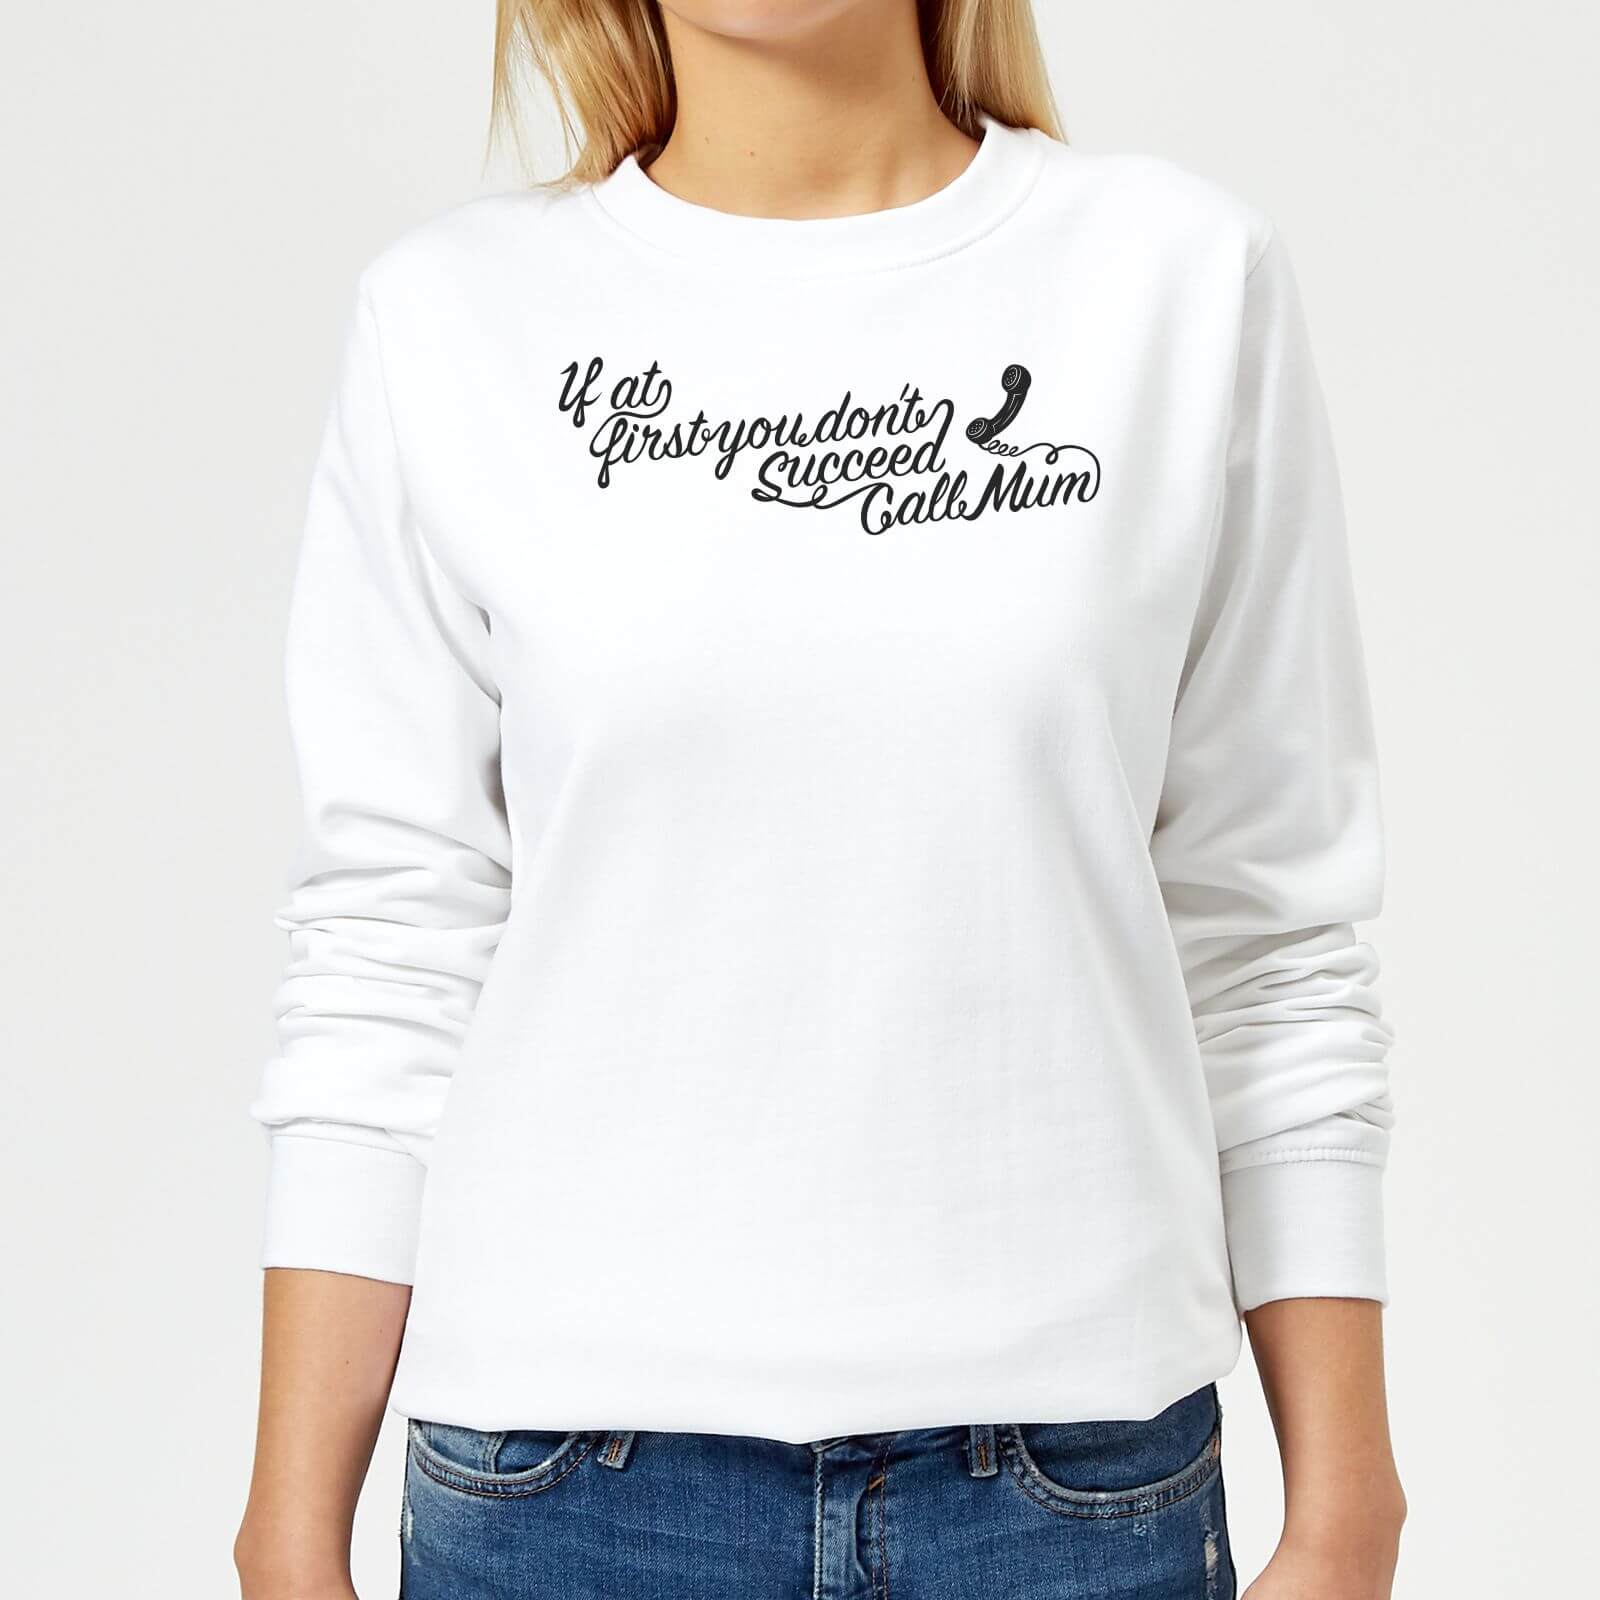 If at first you dont succeed Call Mum Women's Sweatshirt - White - XXL - White